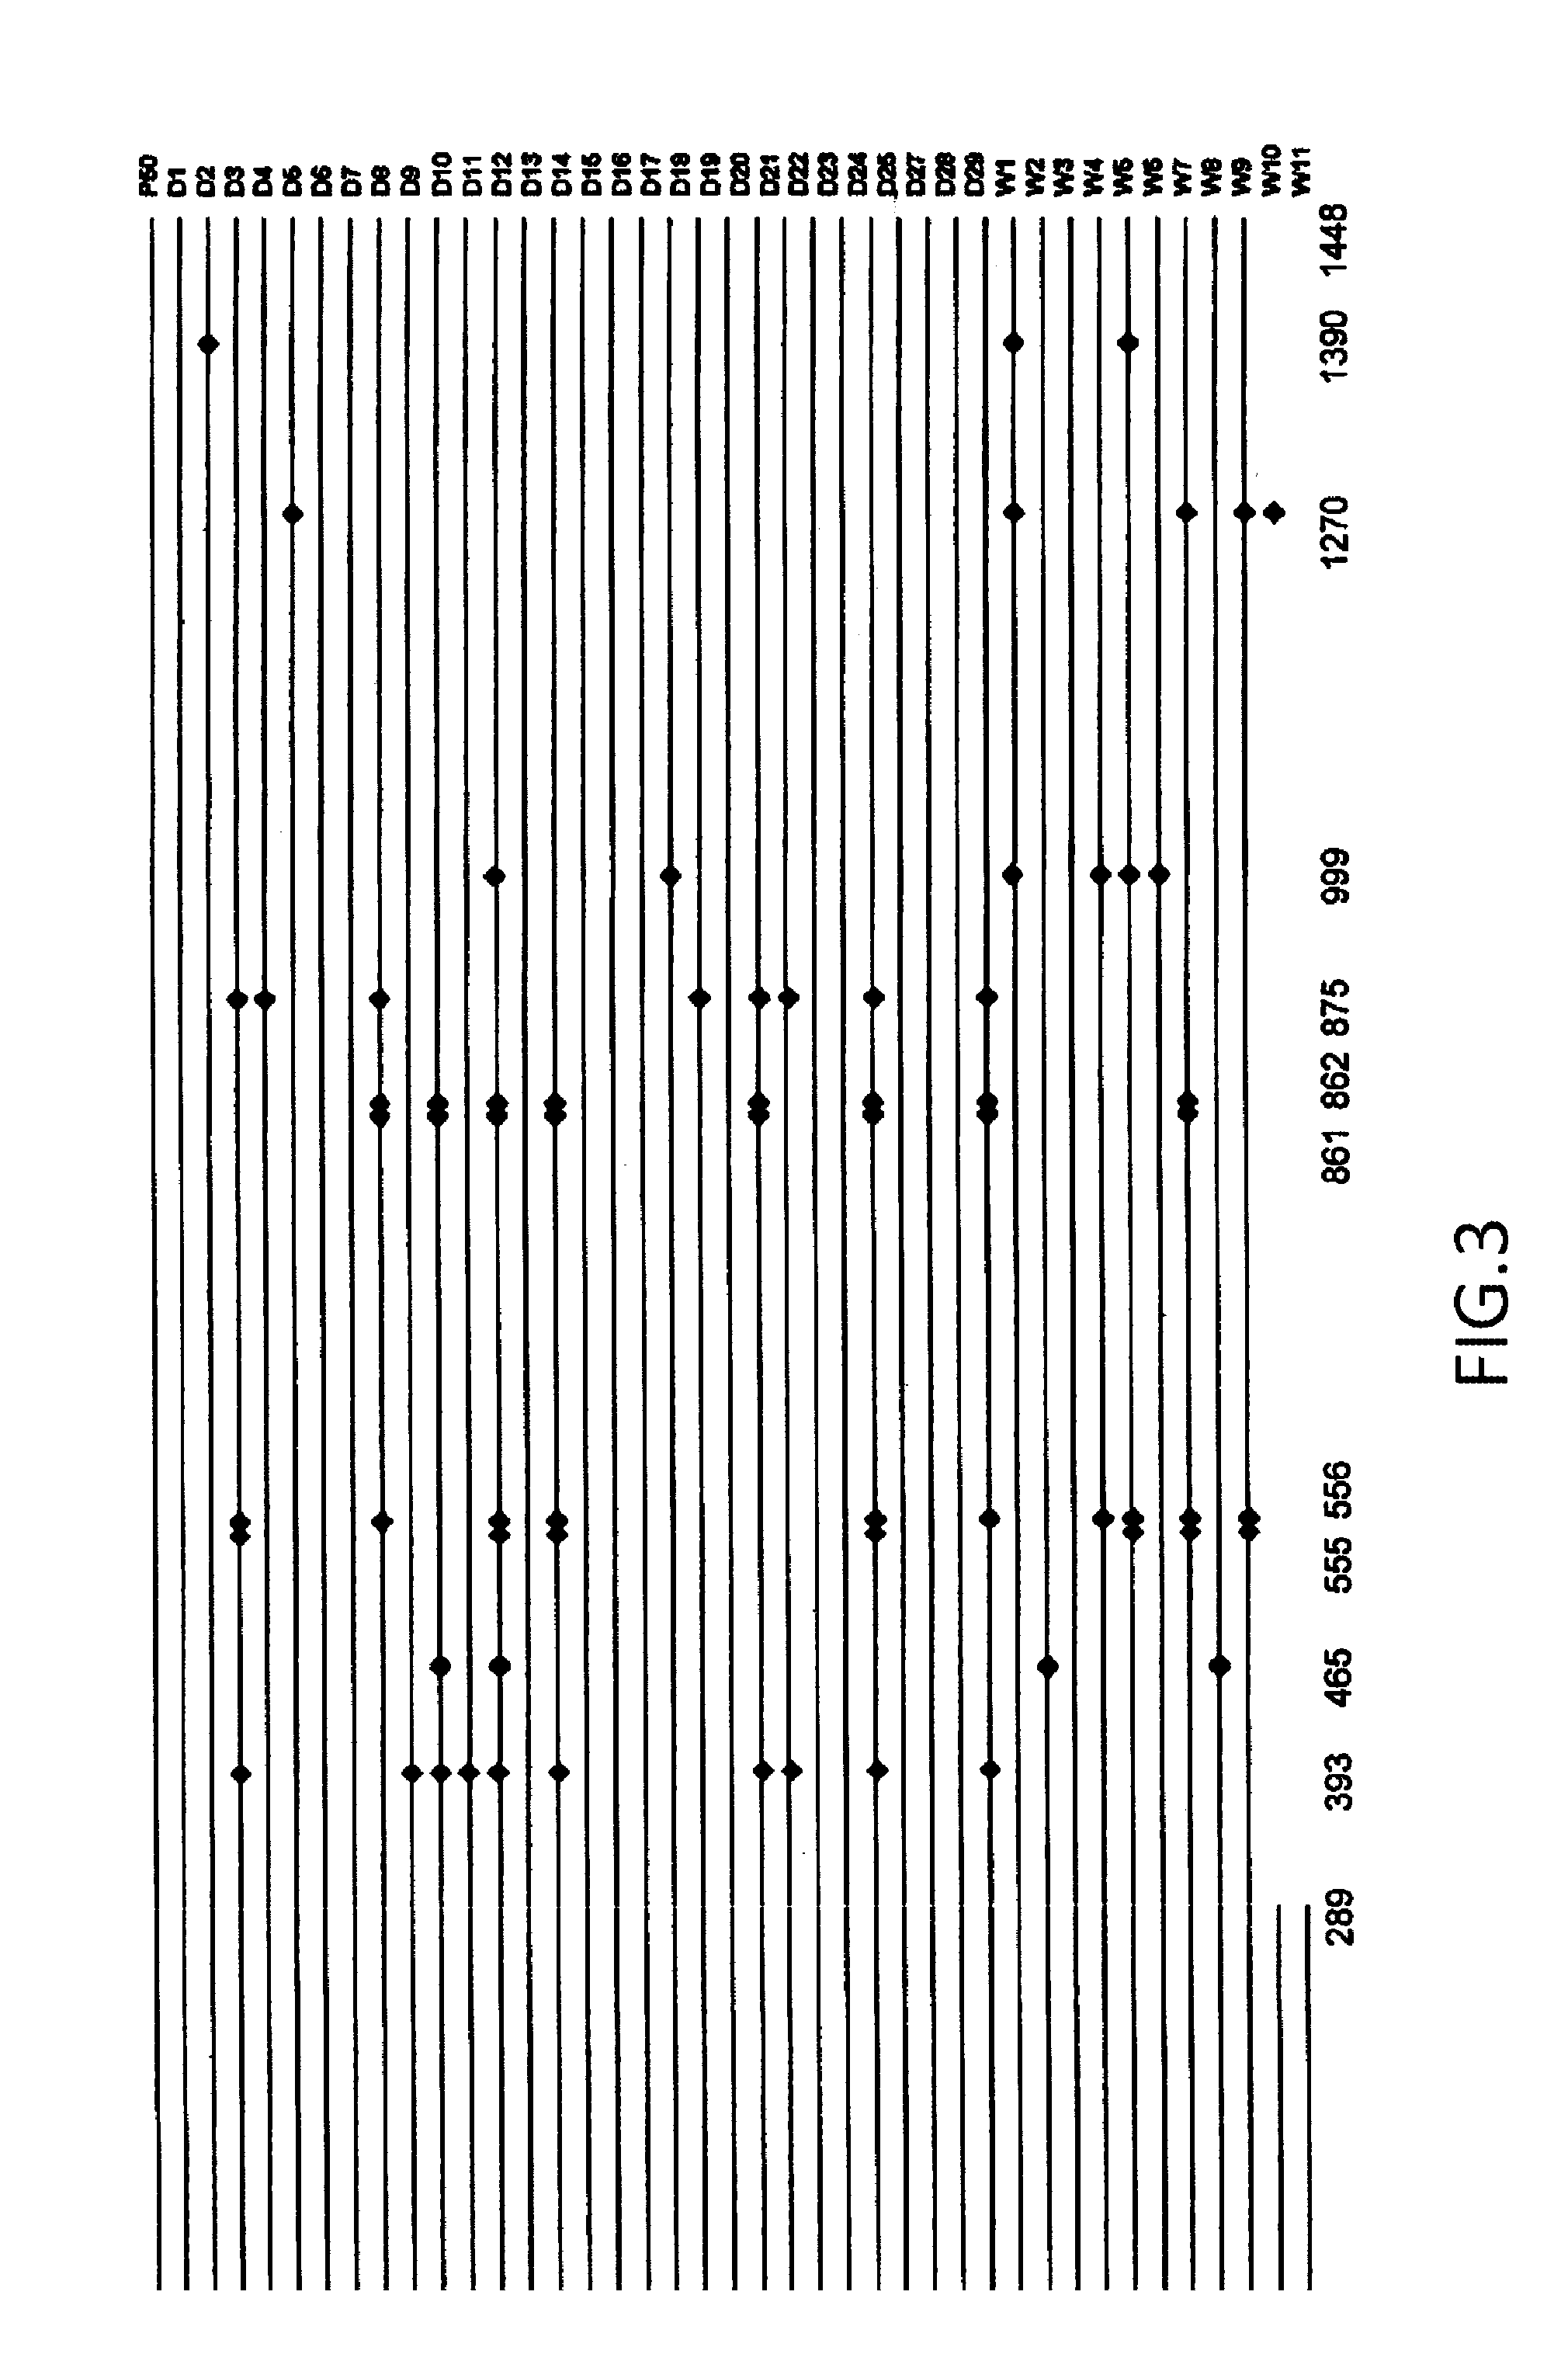 Method and uses for Bombyx mori silk fibroin heavy chain mutation sequence and mutant